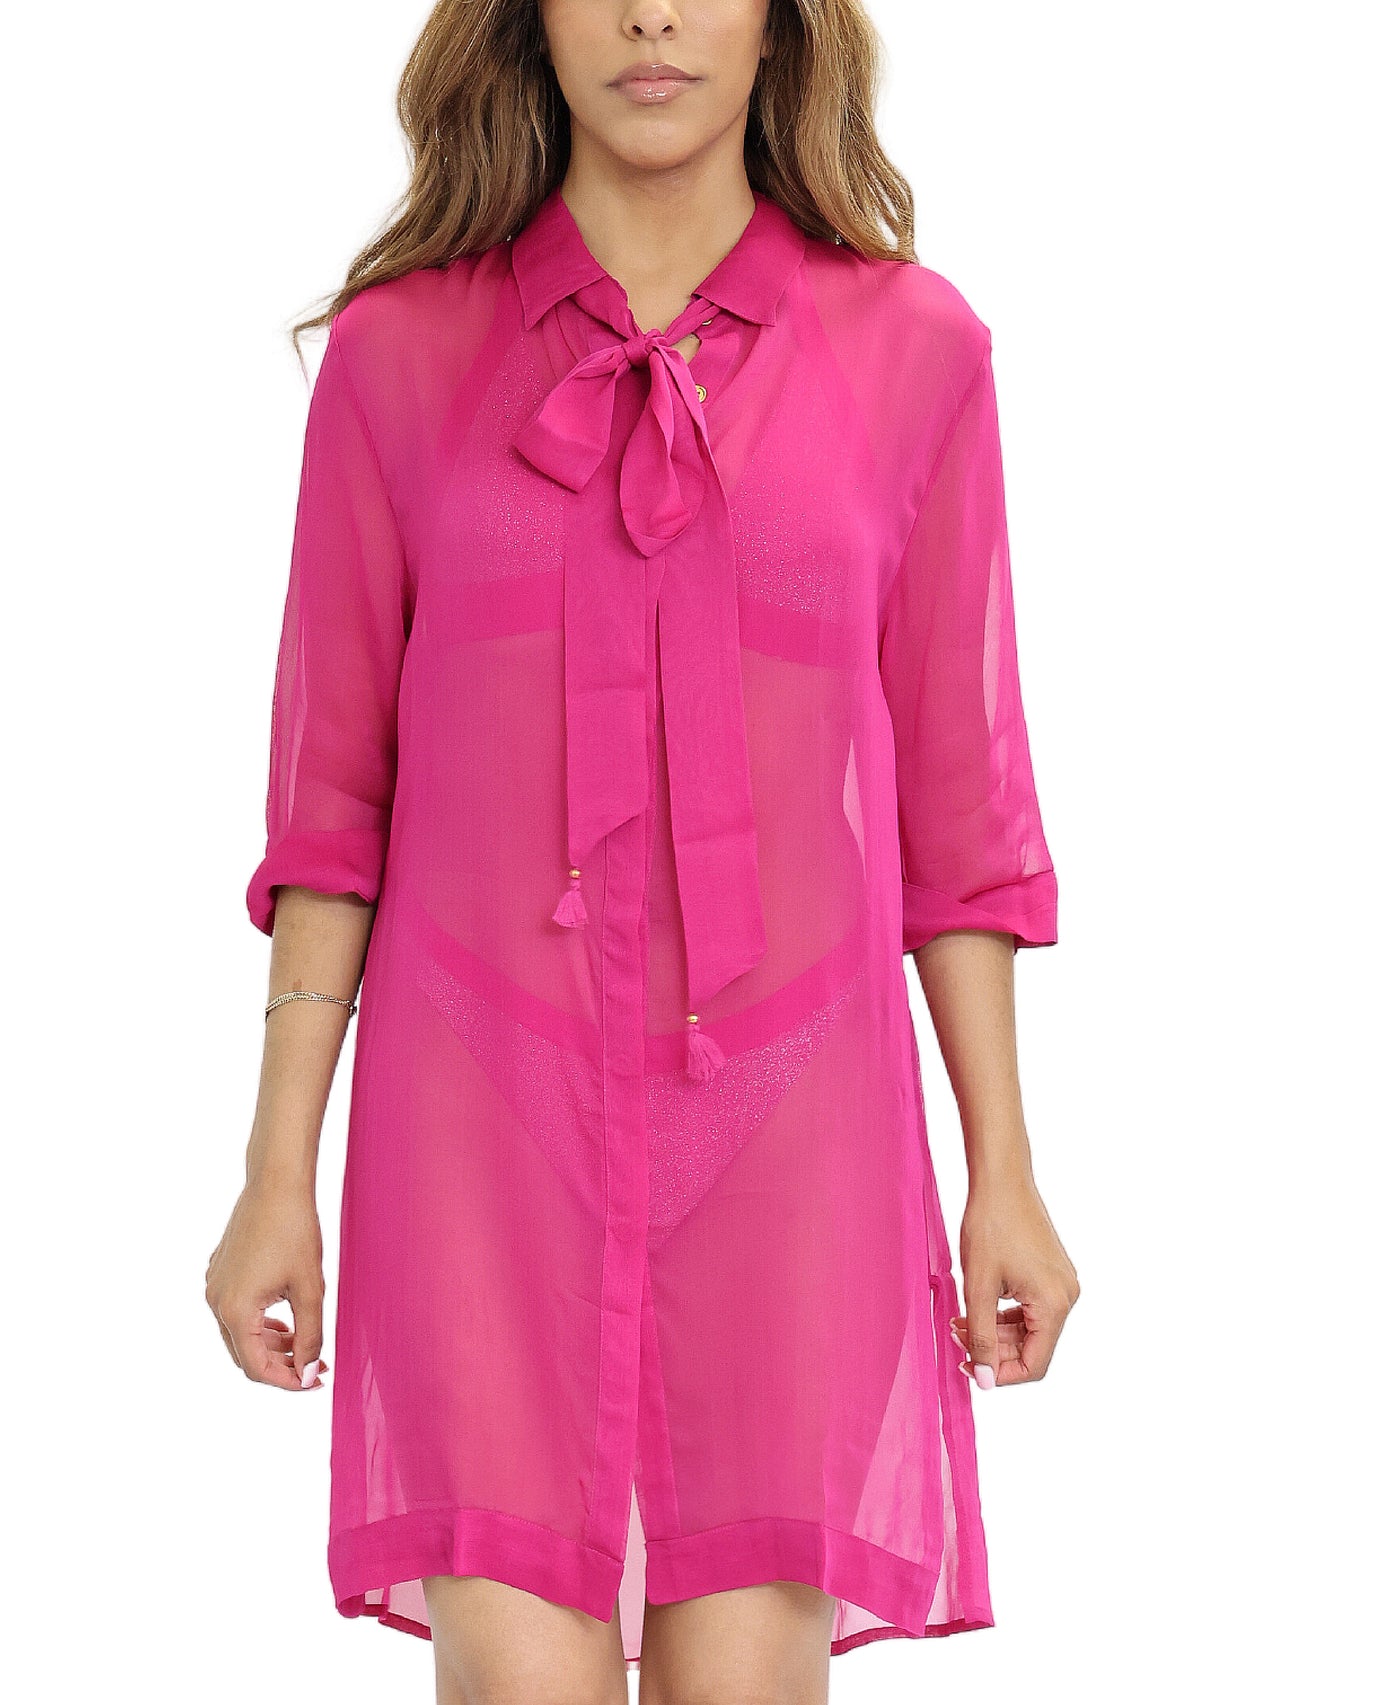 Solid Swim Cover-Up Dress image 1